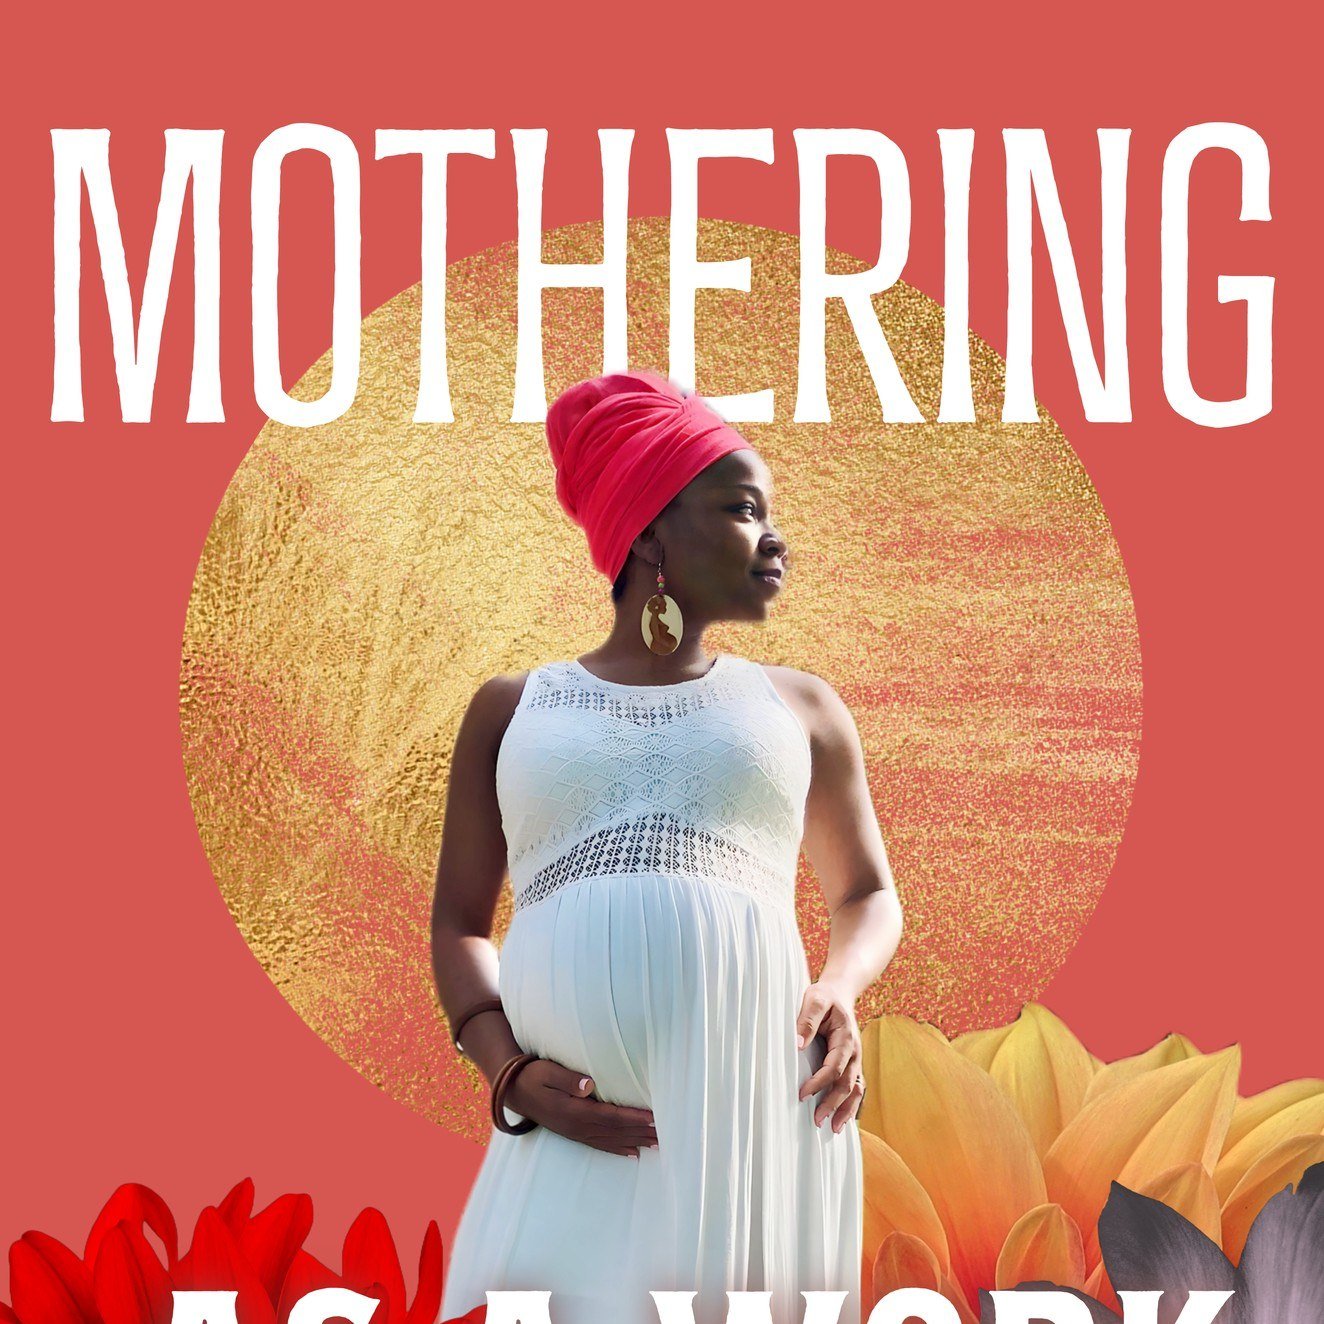 Join me for the launch of &quot;Mothering as a Work of Art: A Black Mama Anthology&quot; 
Remember that time I put out the call for participants for an anthology about mothering? Well I'm excited to invite you to the official launch event for the new